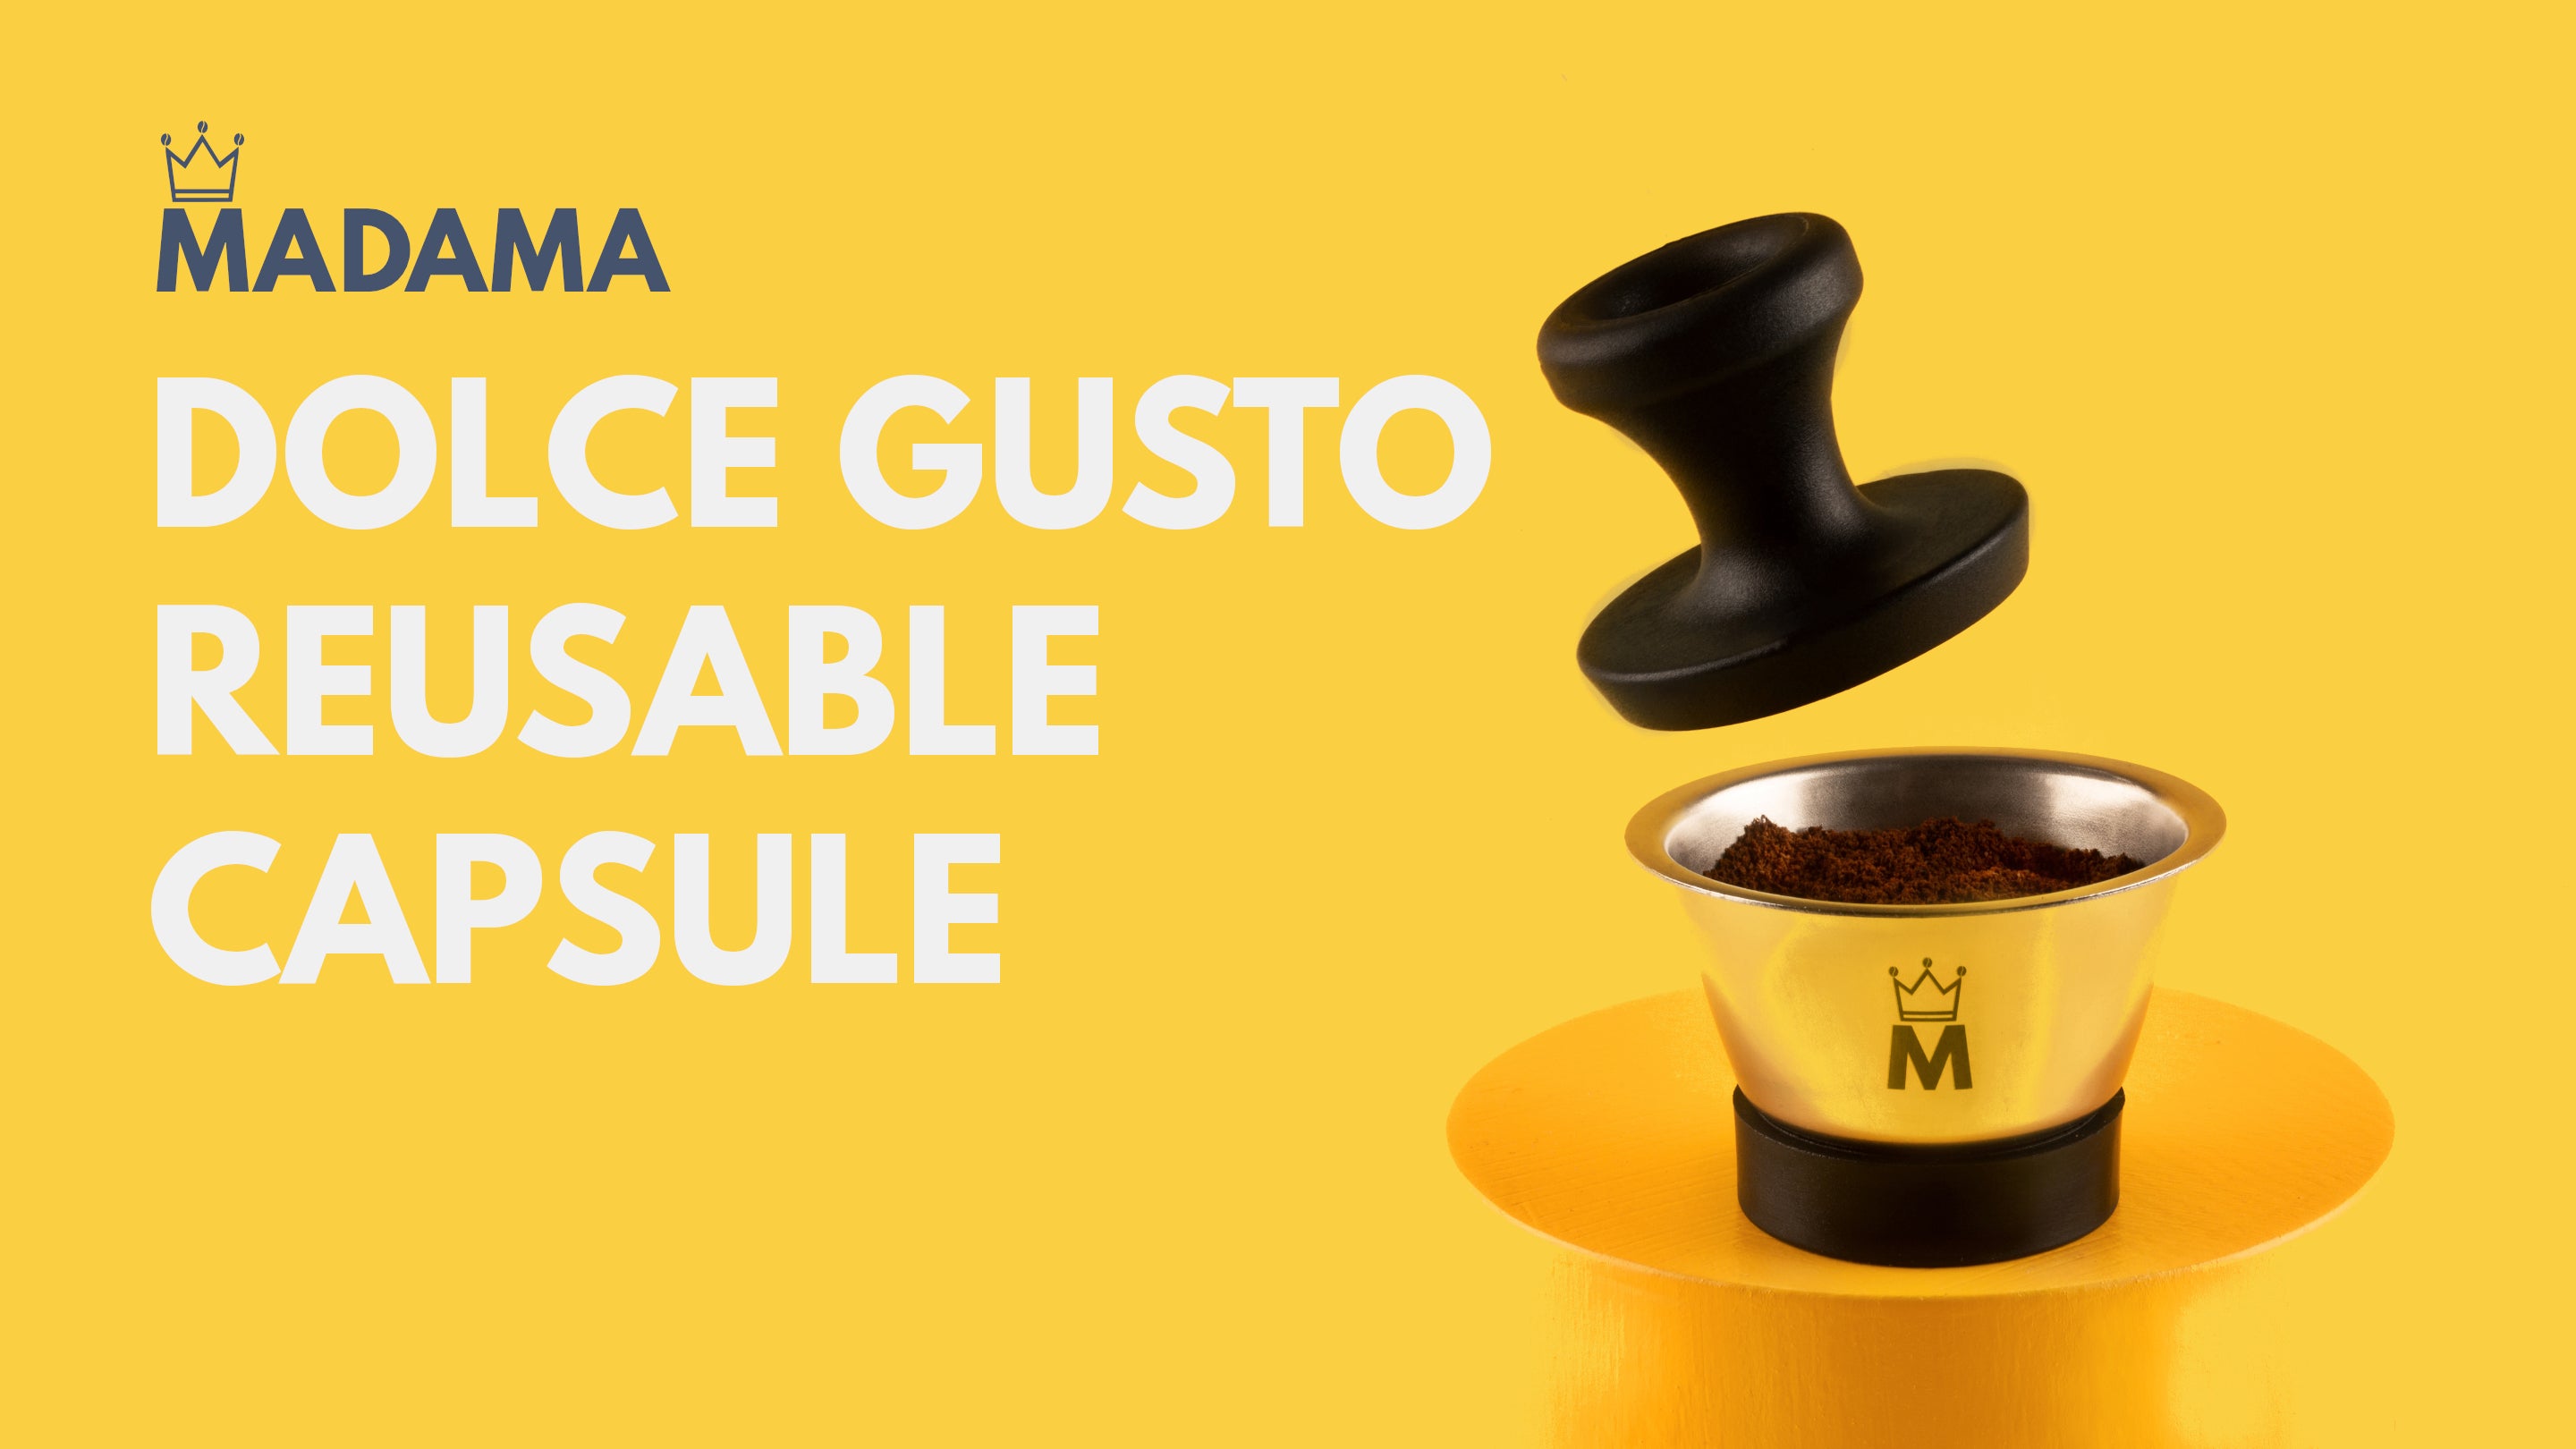 Dolce Gusto – MADAMA - REUSABLE THINGS